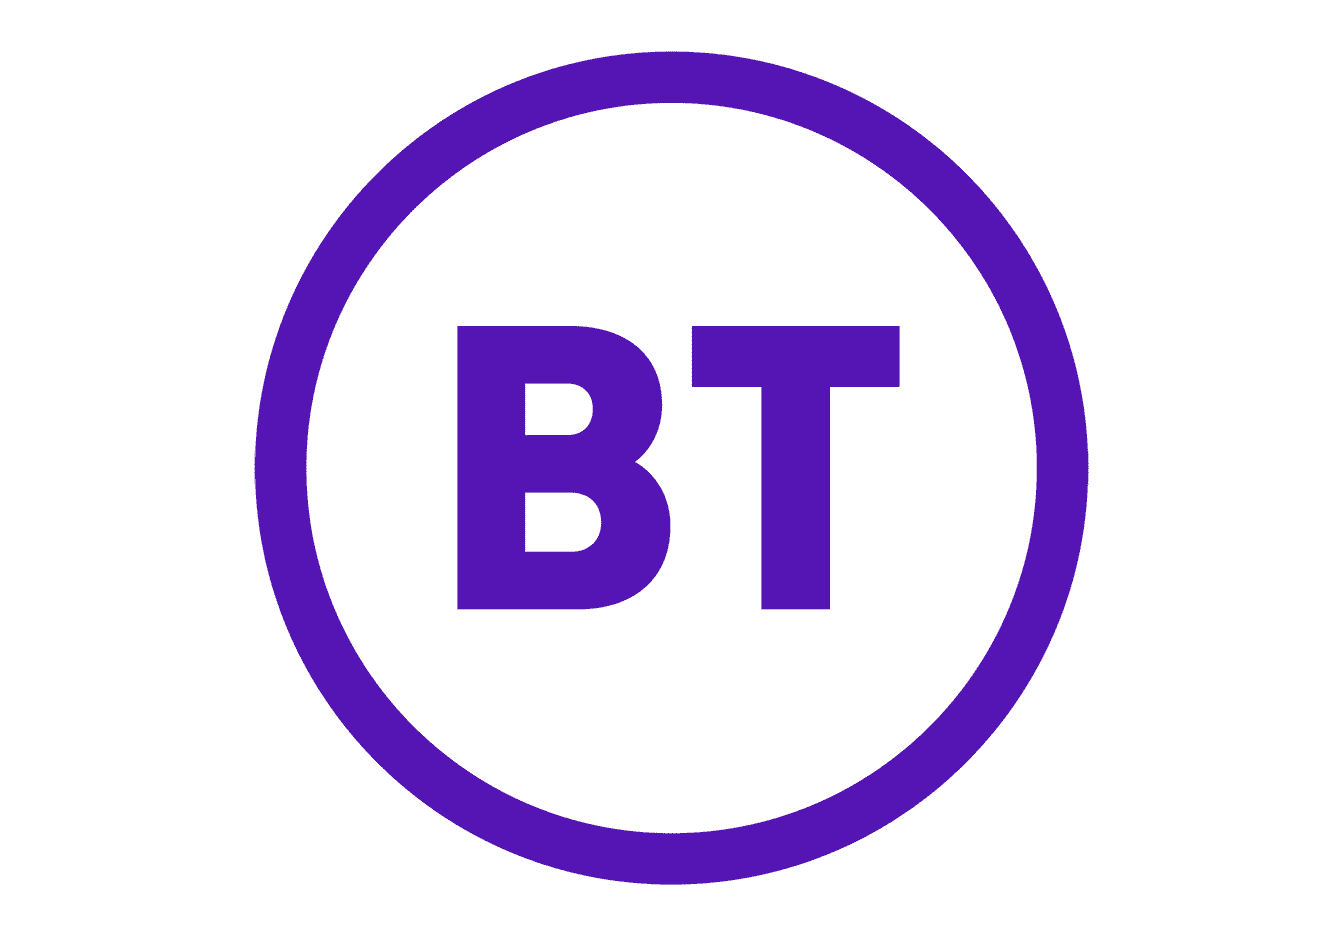 png image of the BT logo in purple